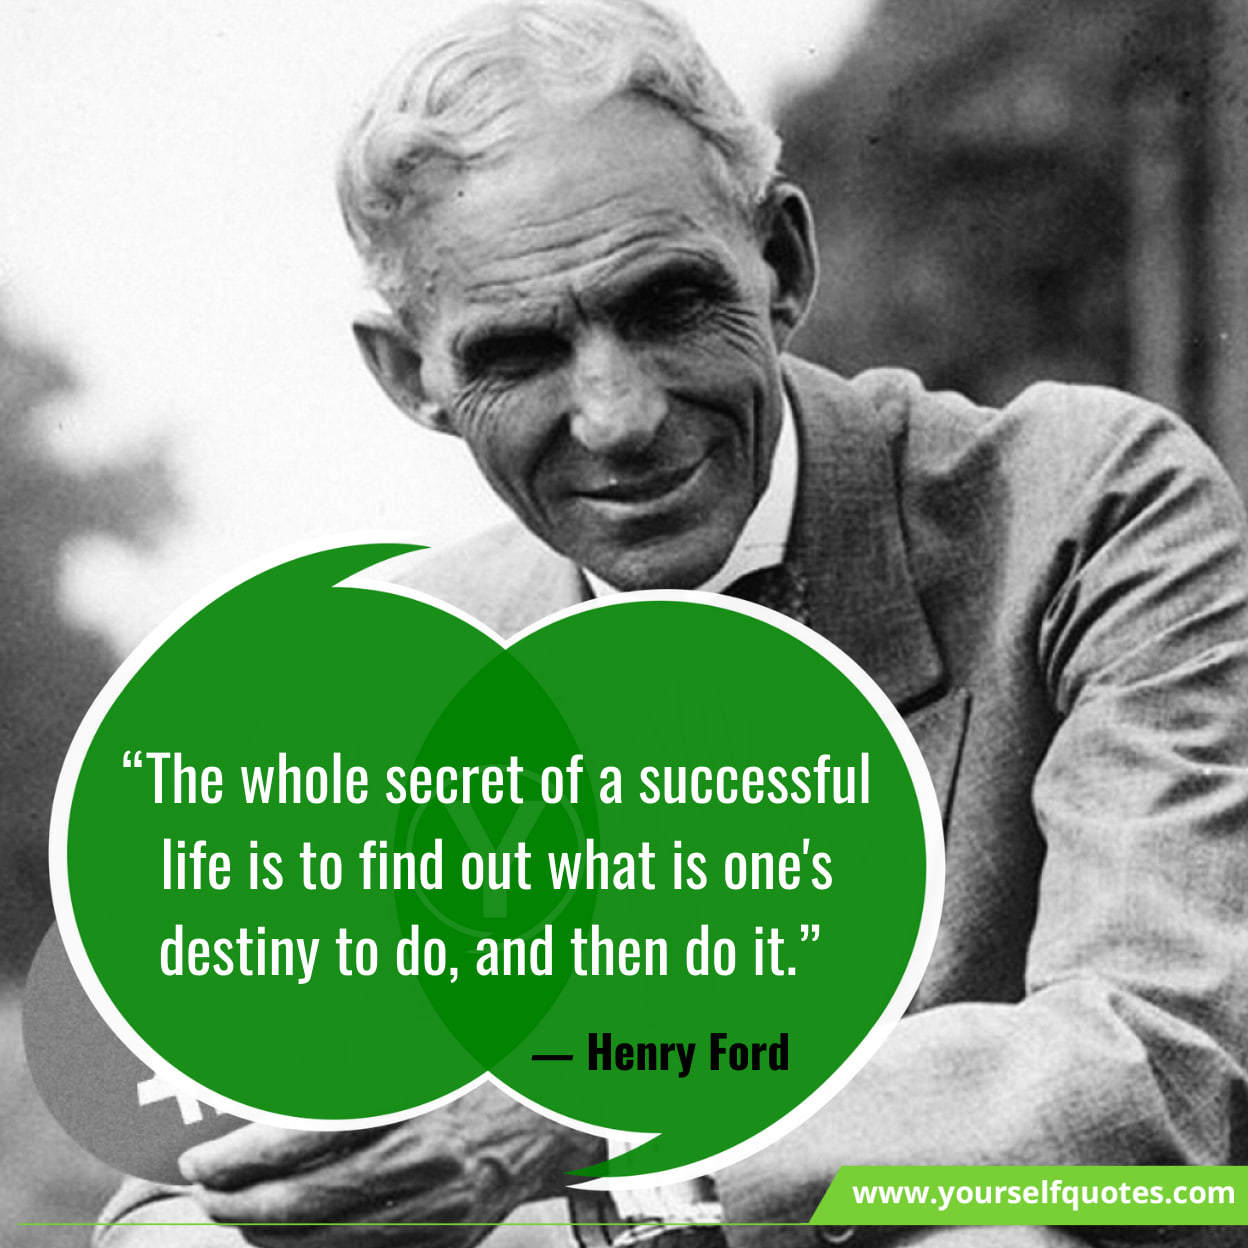 Henry Ford Motivational Quotes